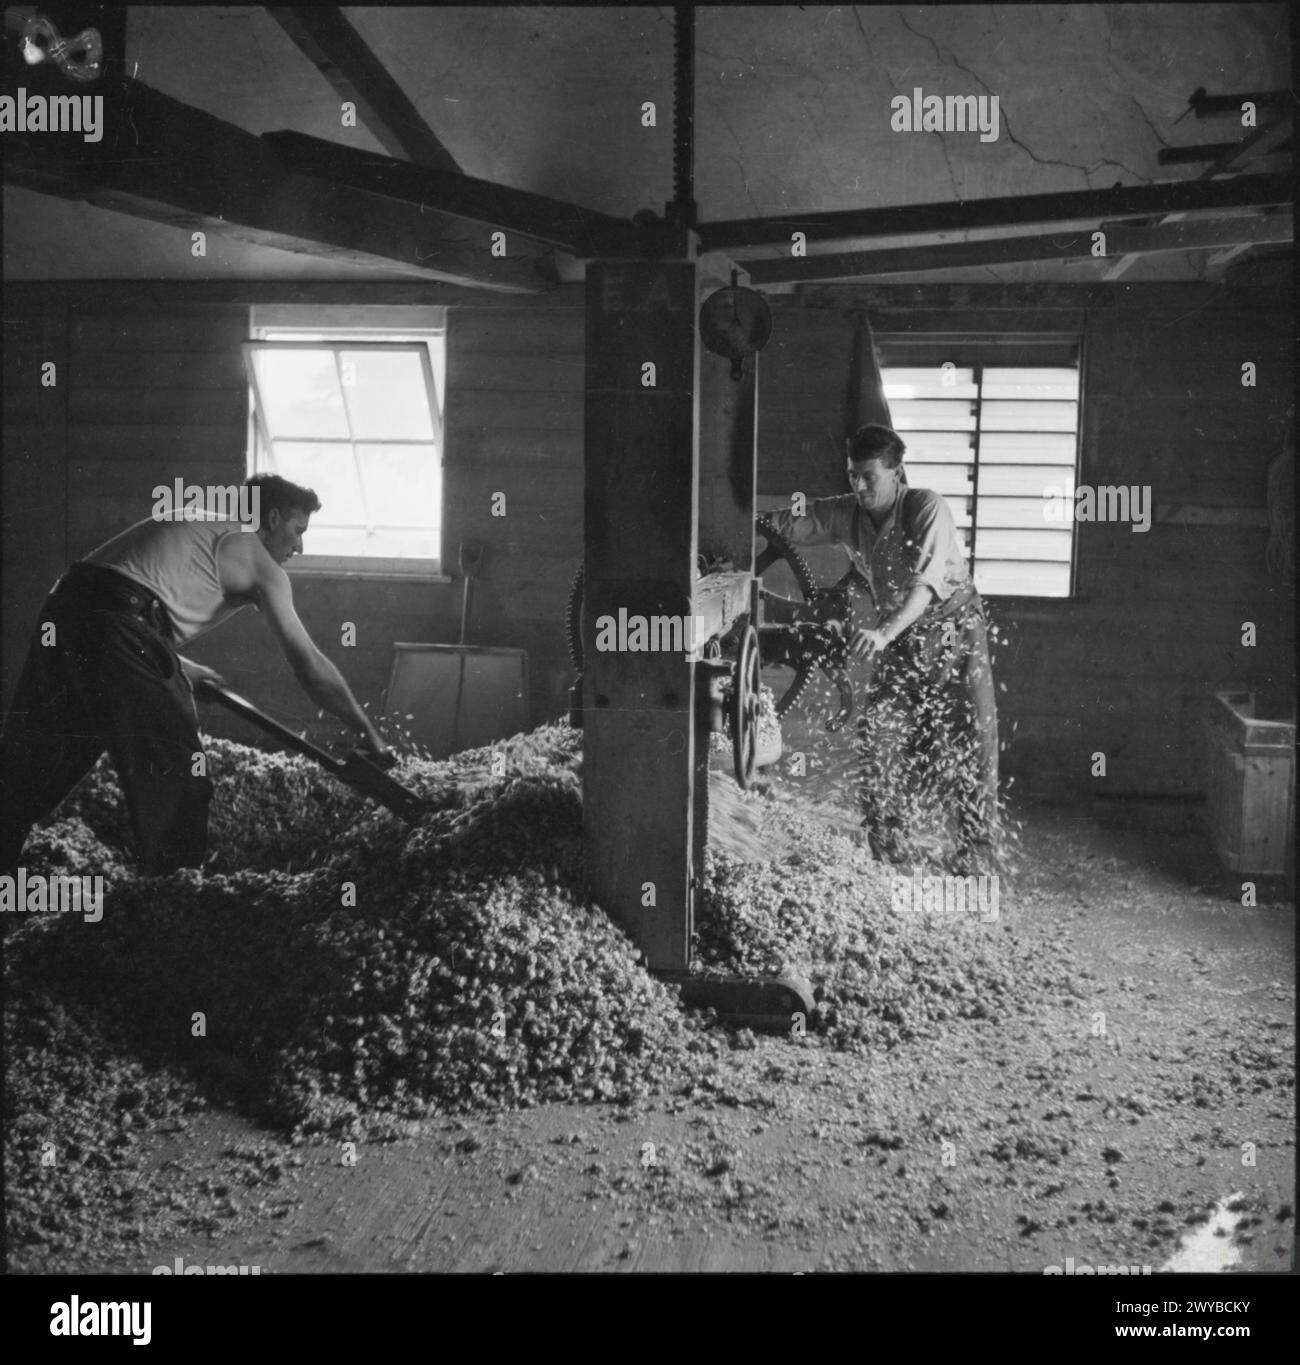 HOPPING IN KENT: HOP-PICKING IN YALDING, KENT, ENGLAND, UK, 1944 - Two men work to compress dried hops on the press in the oast house on a hop farm in Yalding, Kent. The original caption explains the process: 'sometimes coal heated furnaces are used, the hot air from the being conveyed to the top storey of the oast house by suction fans, to blow on the hops laid out in horse hair cloths'. The hops are then compressed into sacks or 'pockets', which contain 140-150 bushels and weigh 1 and a half cwts. The pockets are then sent off to the brewer. , Stock Photo